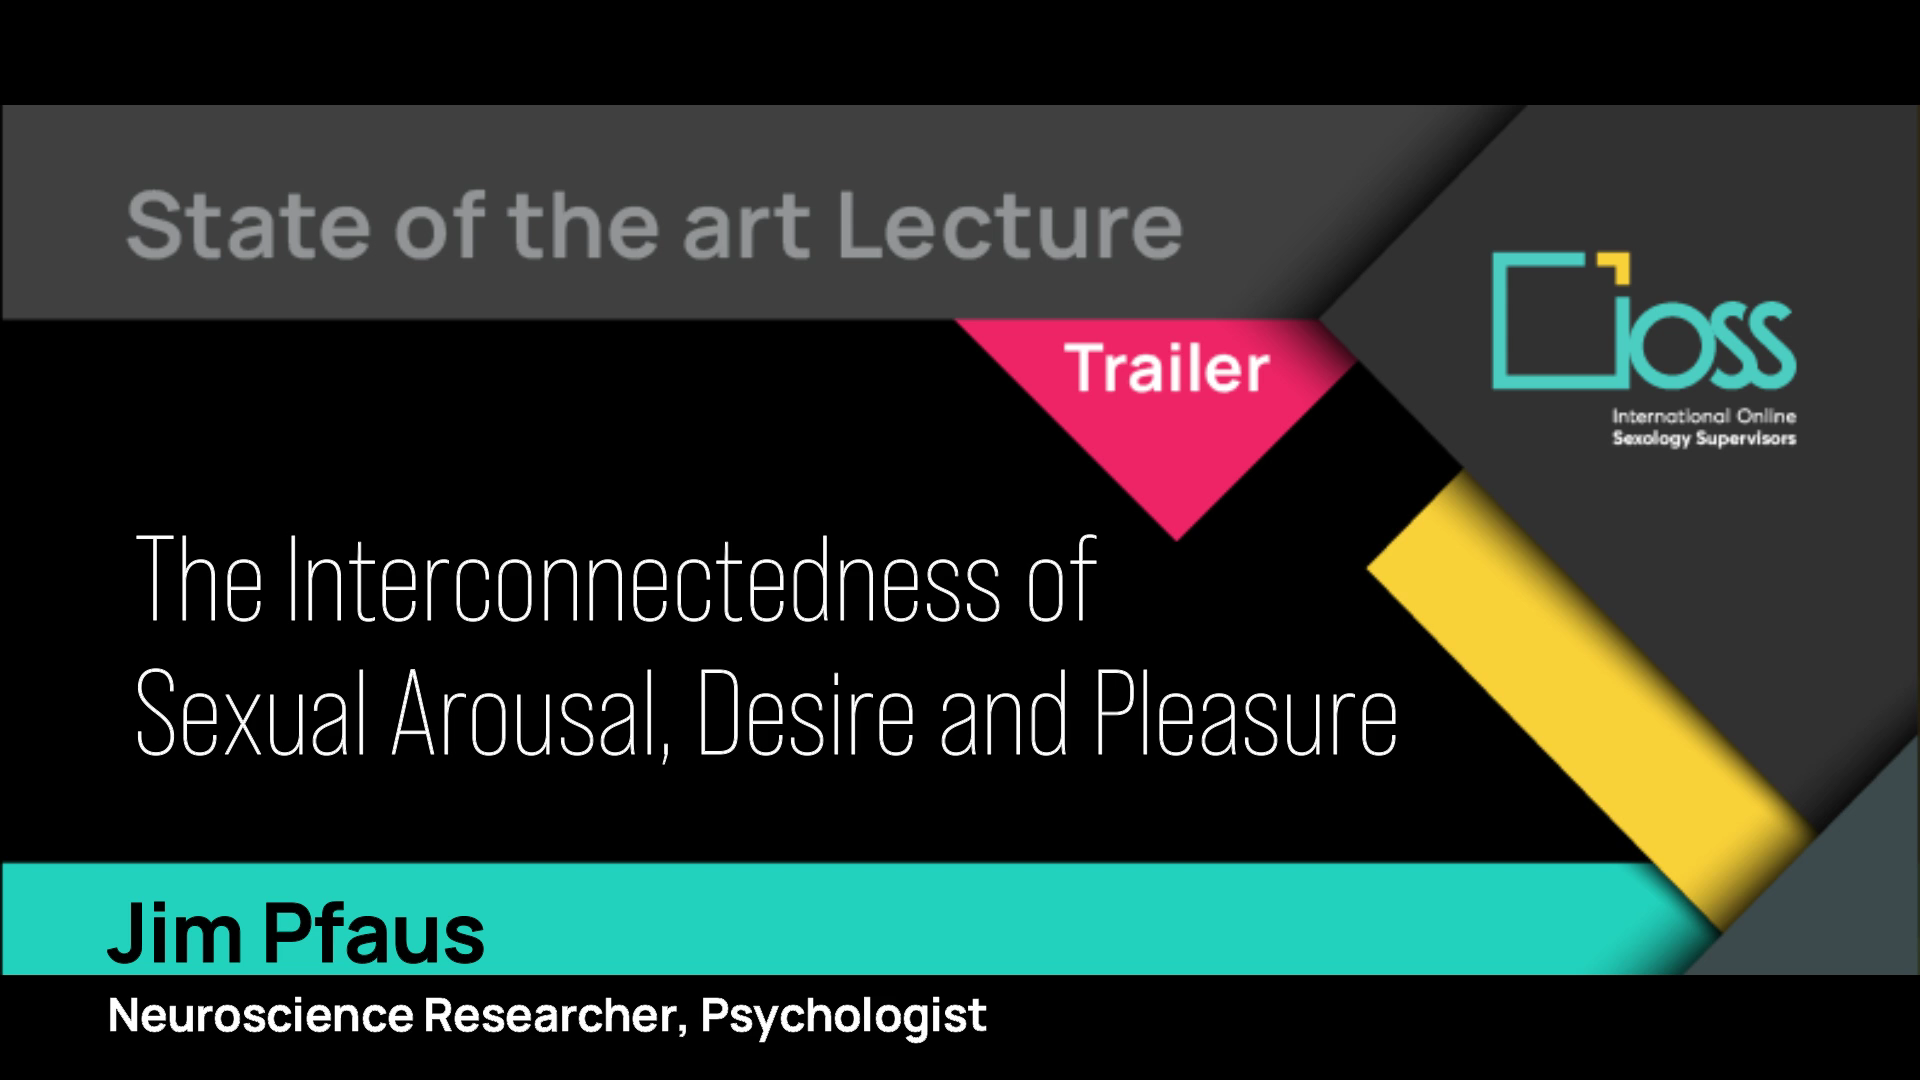 Trailer The Interconnectedness of Sexual Arousal, Desire and Pleasure